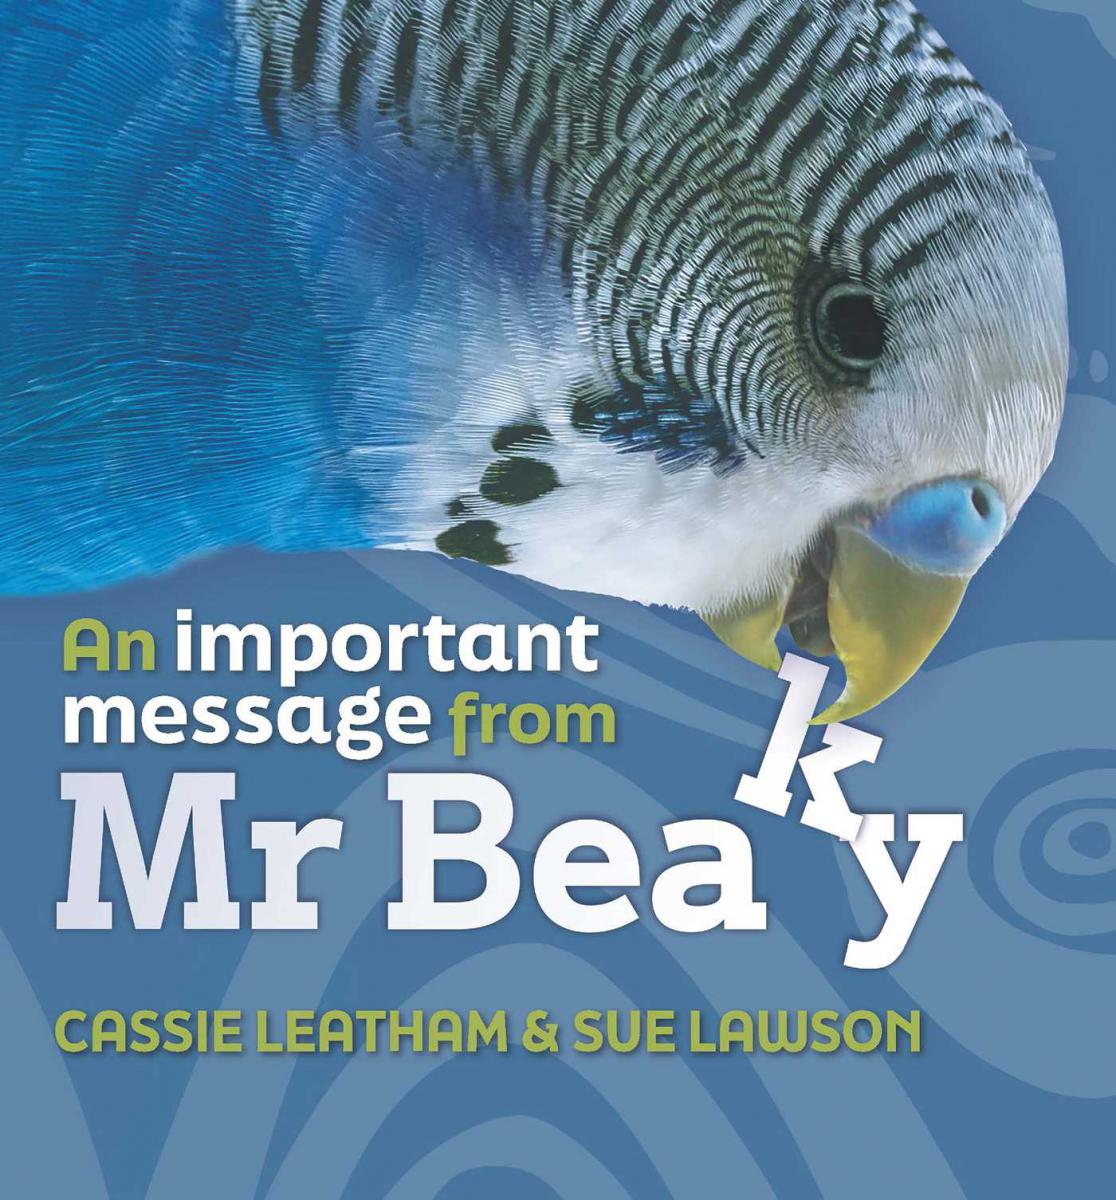 An Important Message from Mr Beaky, Cassie Leatham and Sue Lawson